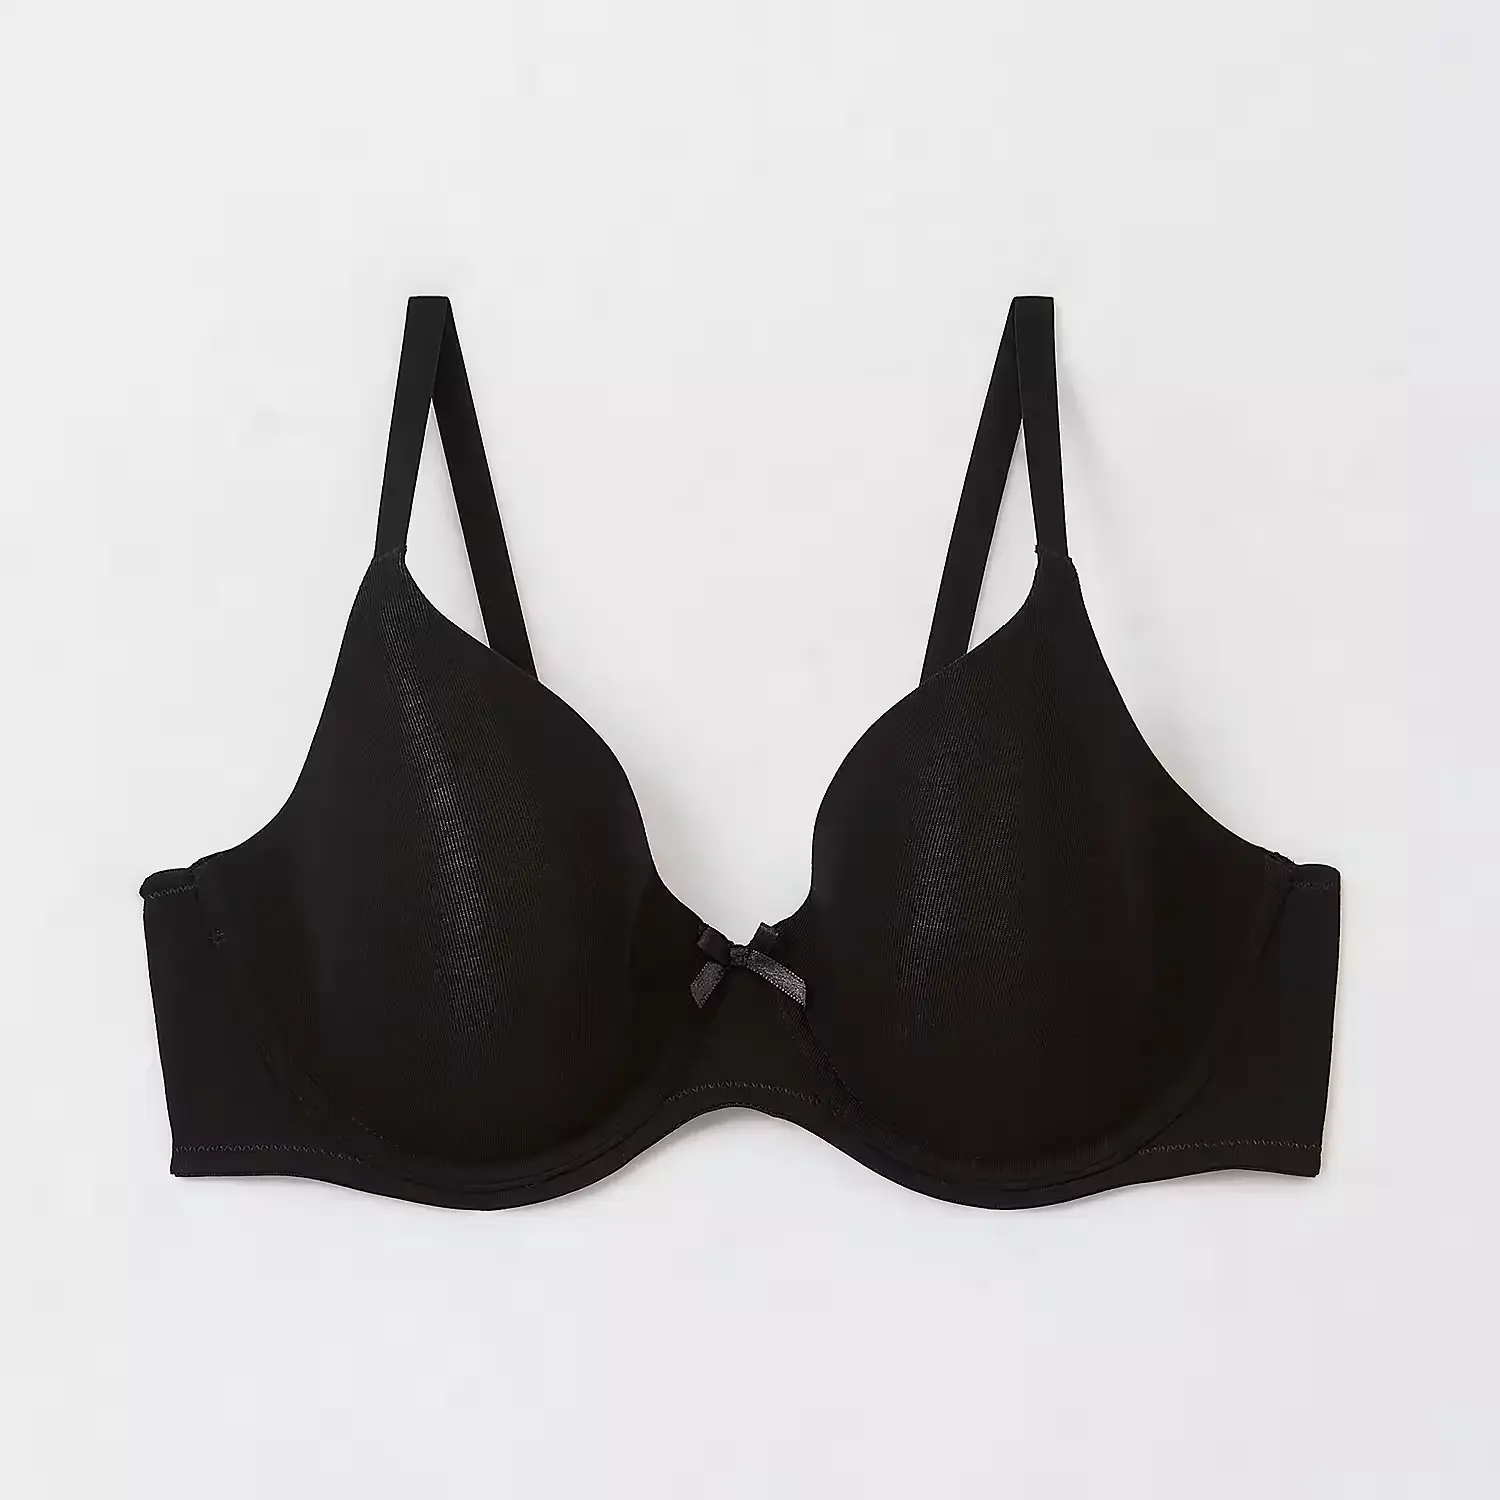 Read more about the article Ambrielle Bra Reviews: Is Ambrielle Bra Worth Your Money?